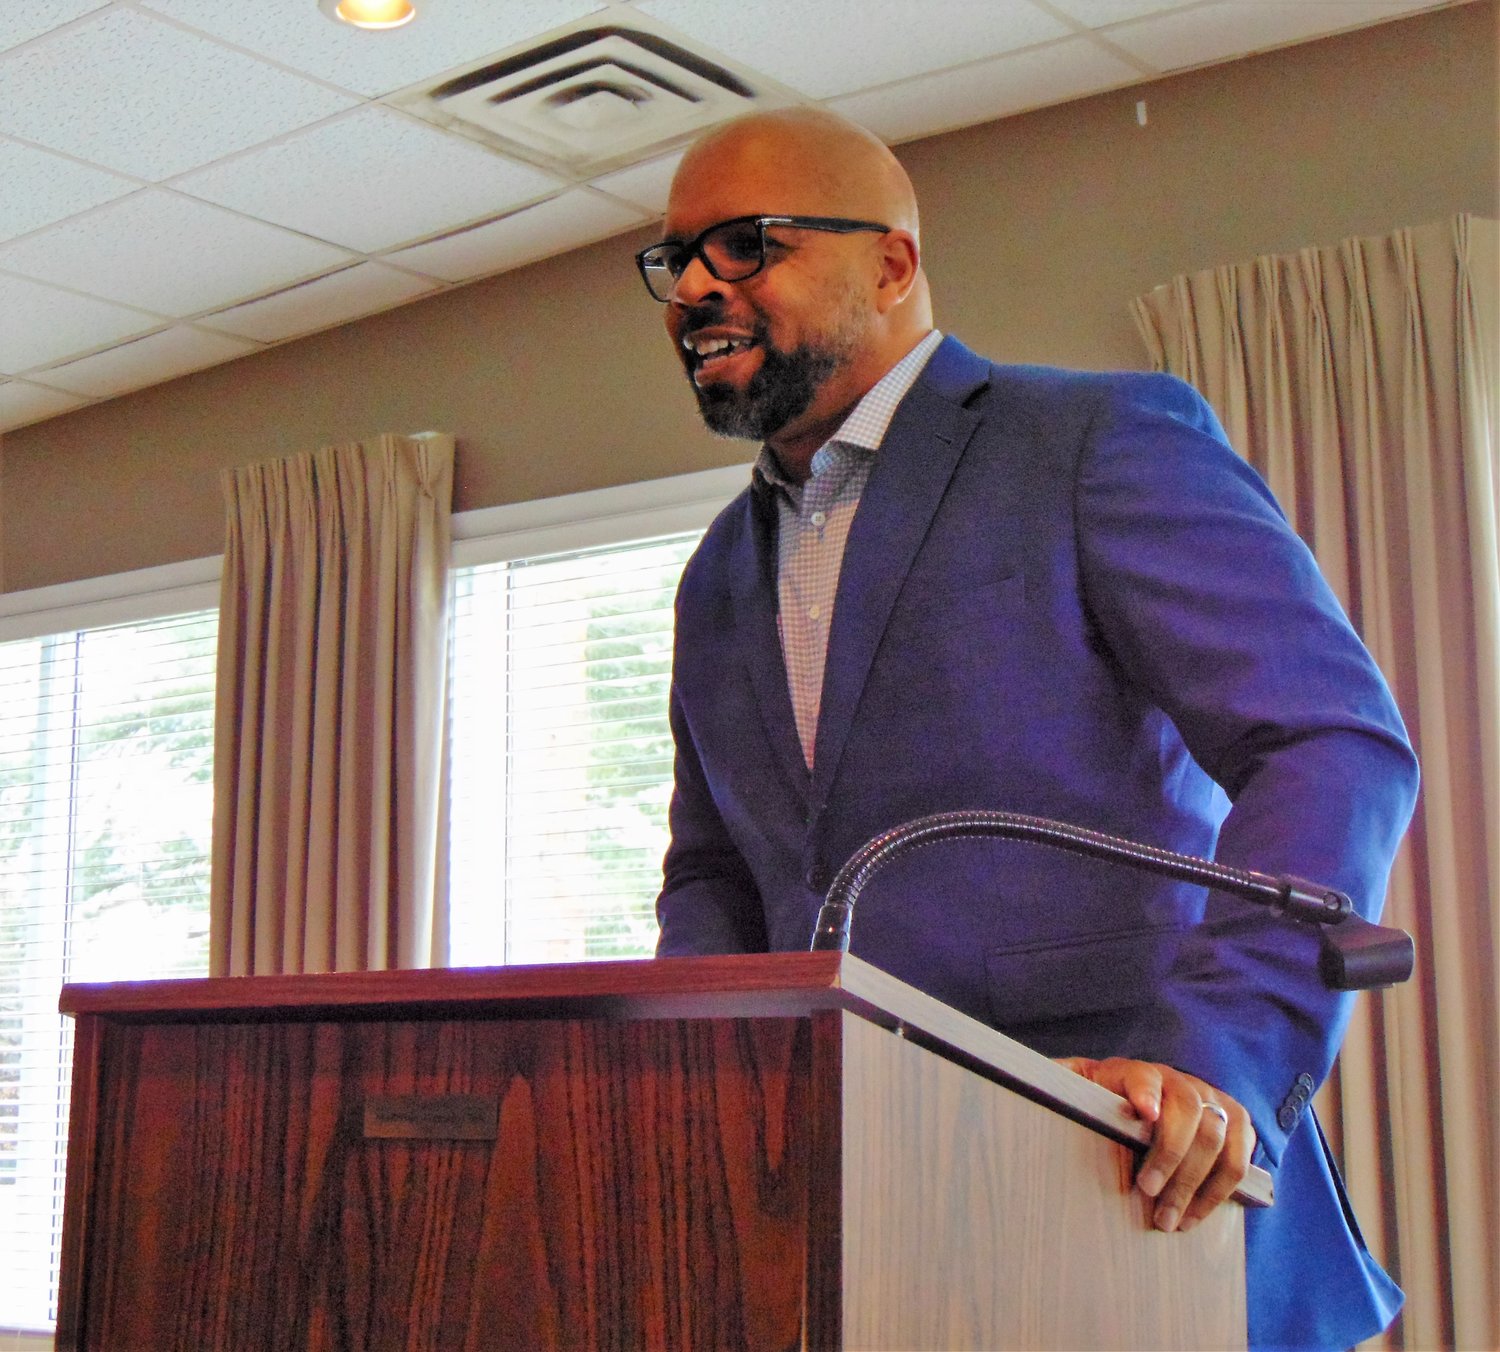 Keith Weaver, co-founder of Uncle Nearest Premium
Whiskey, was guest speaker at Thursday’s Chamber
Luncheon.